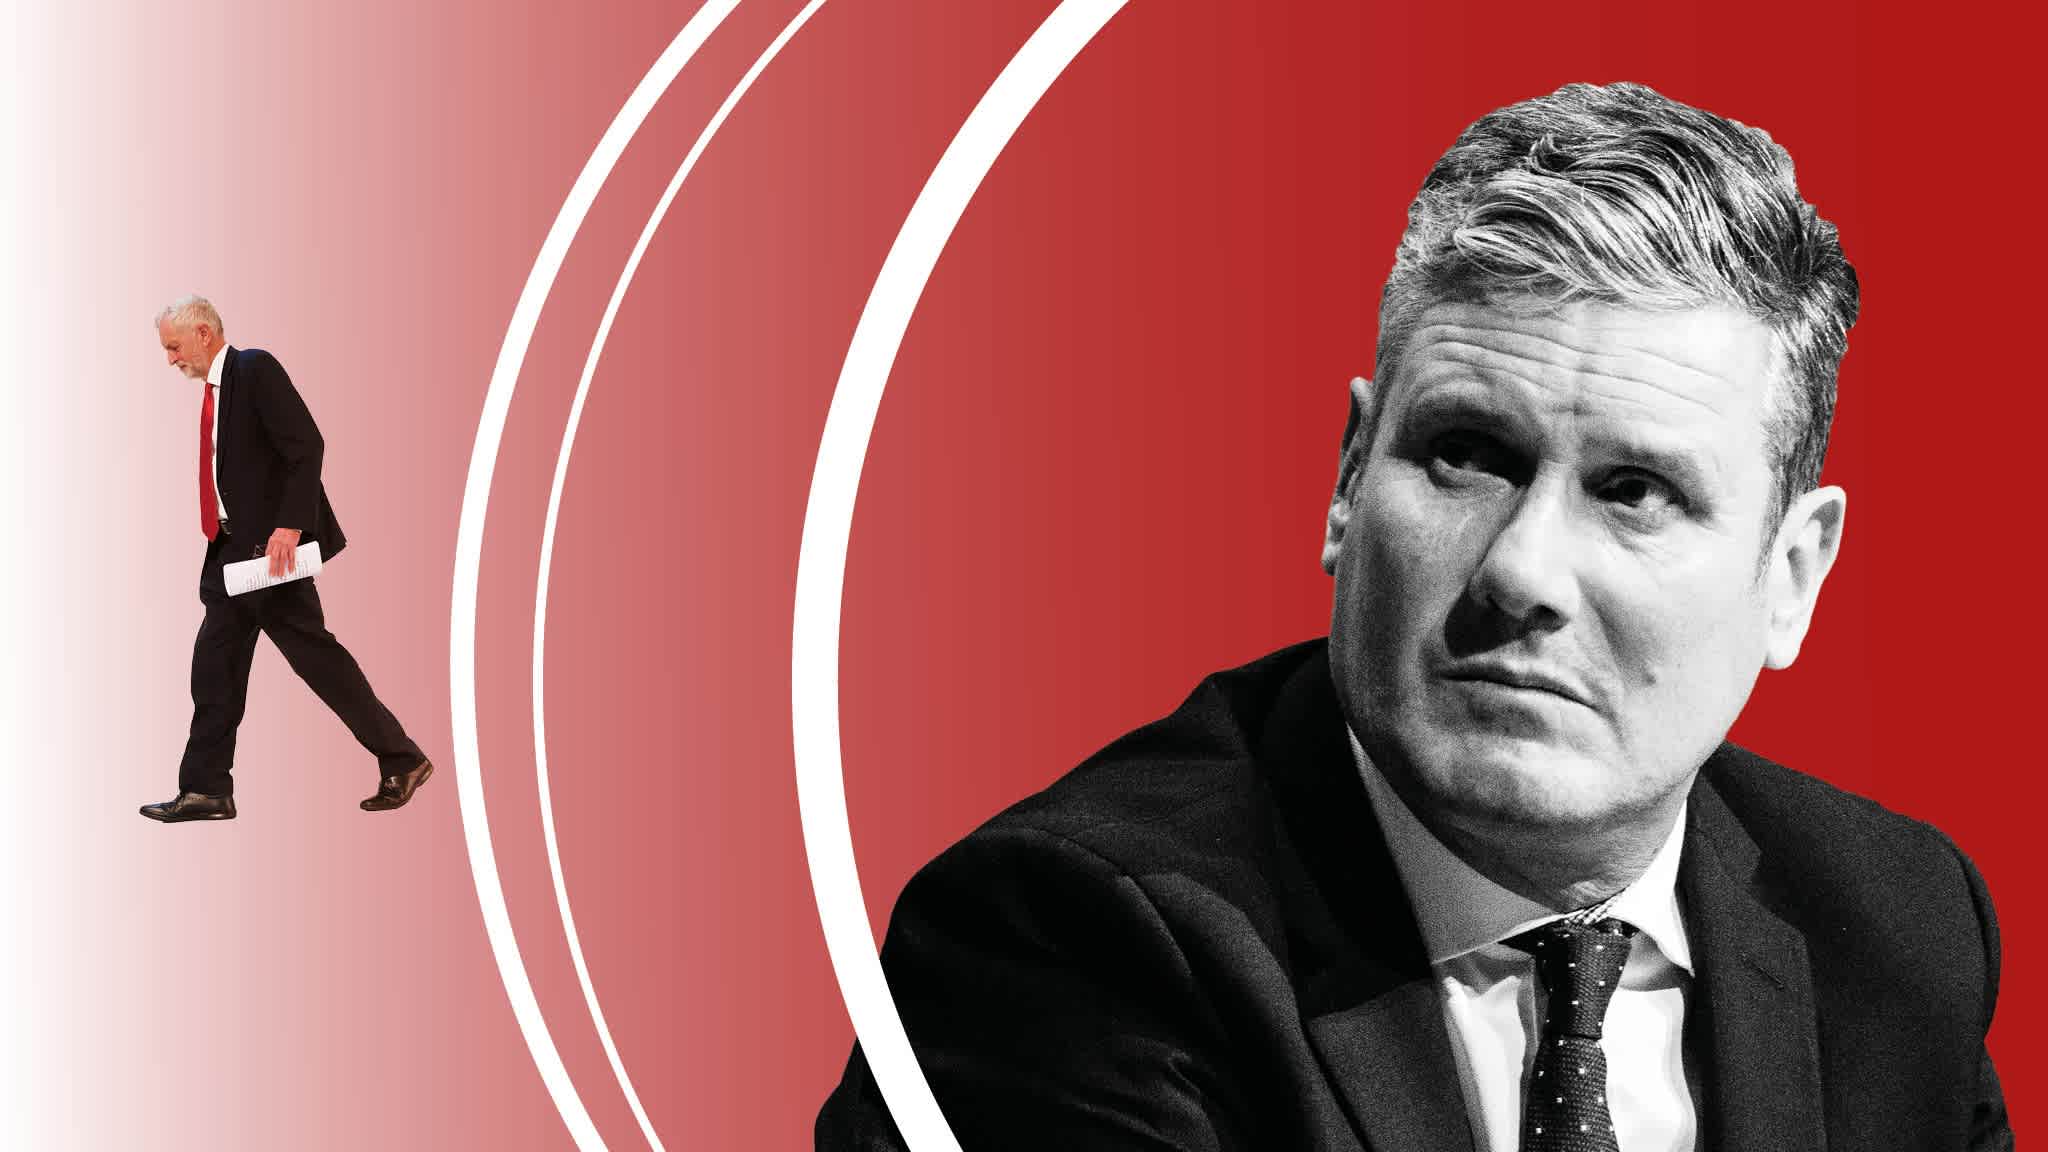 Keir Starmer’s ruthless remaking of the Labour party